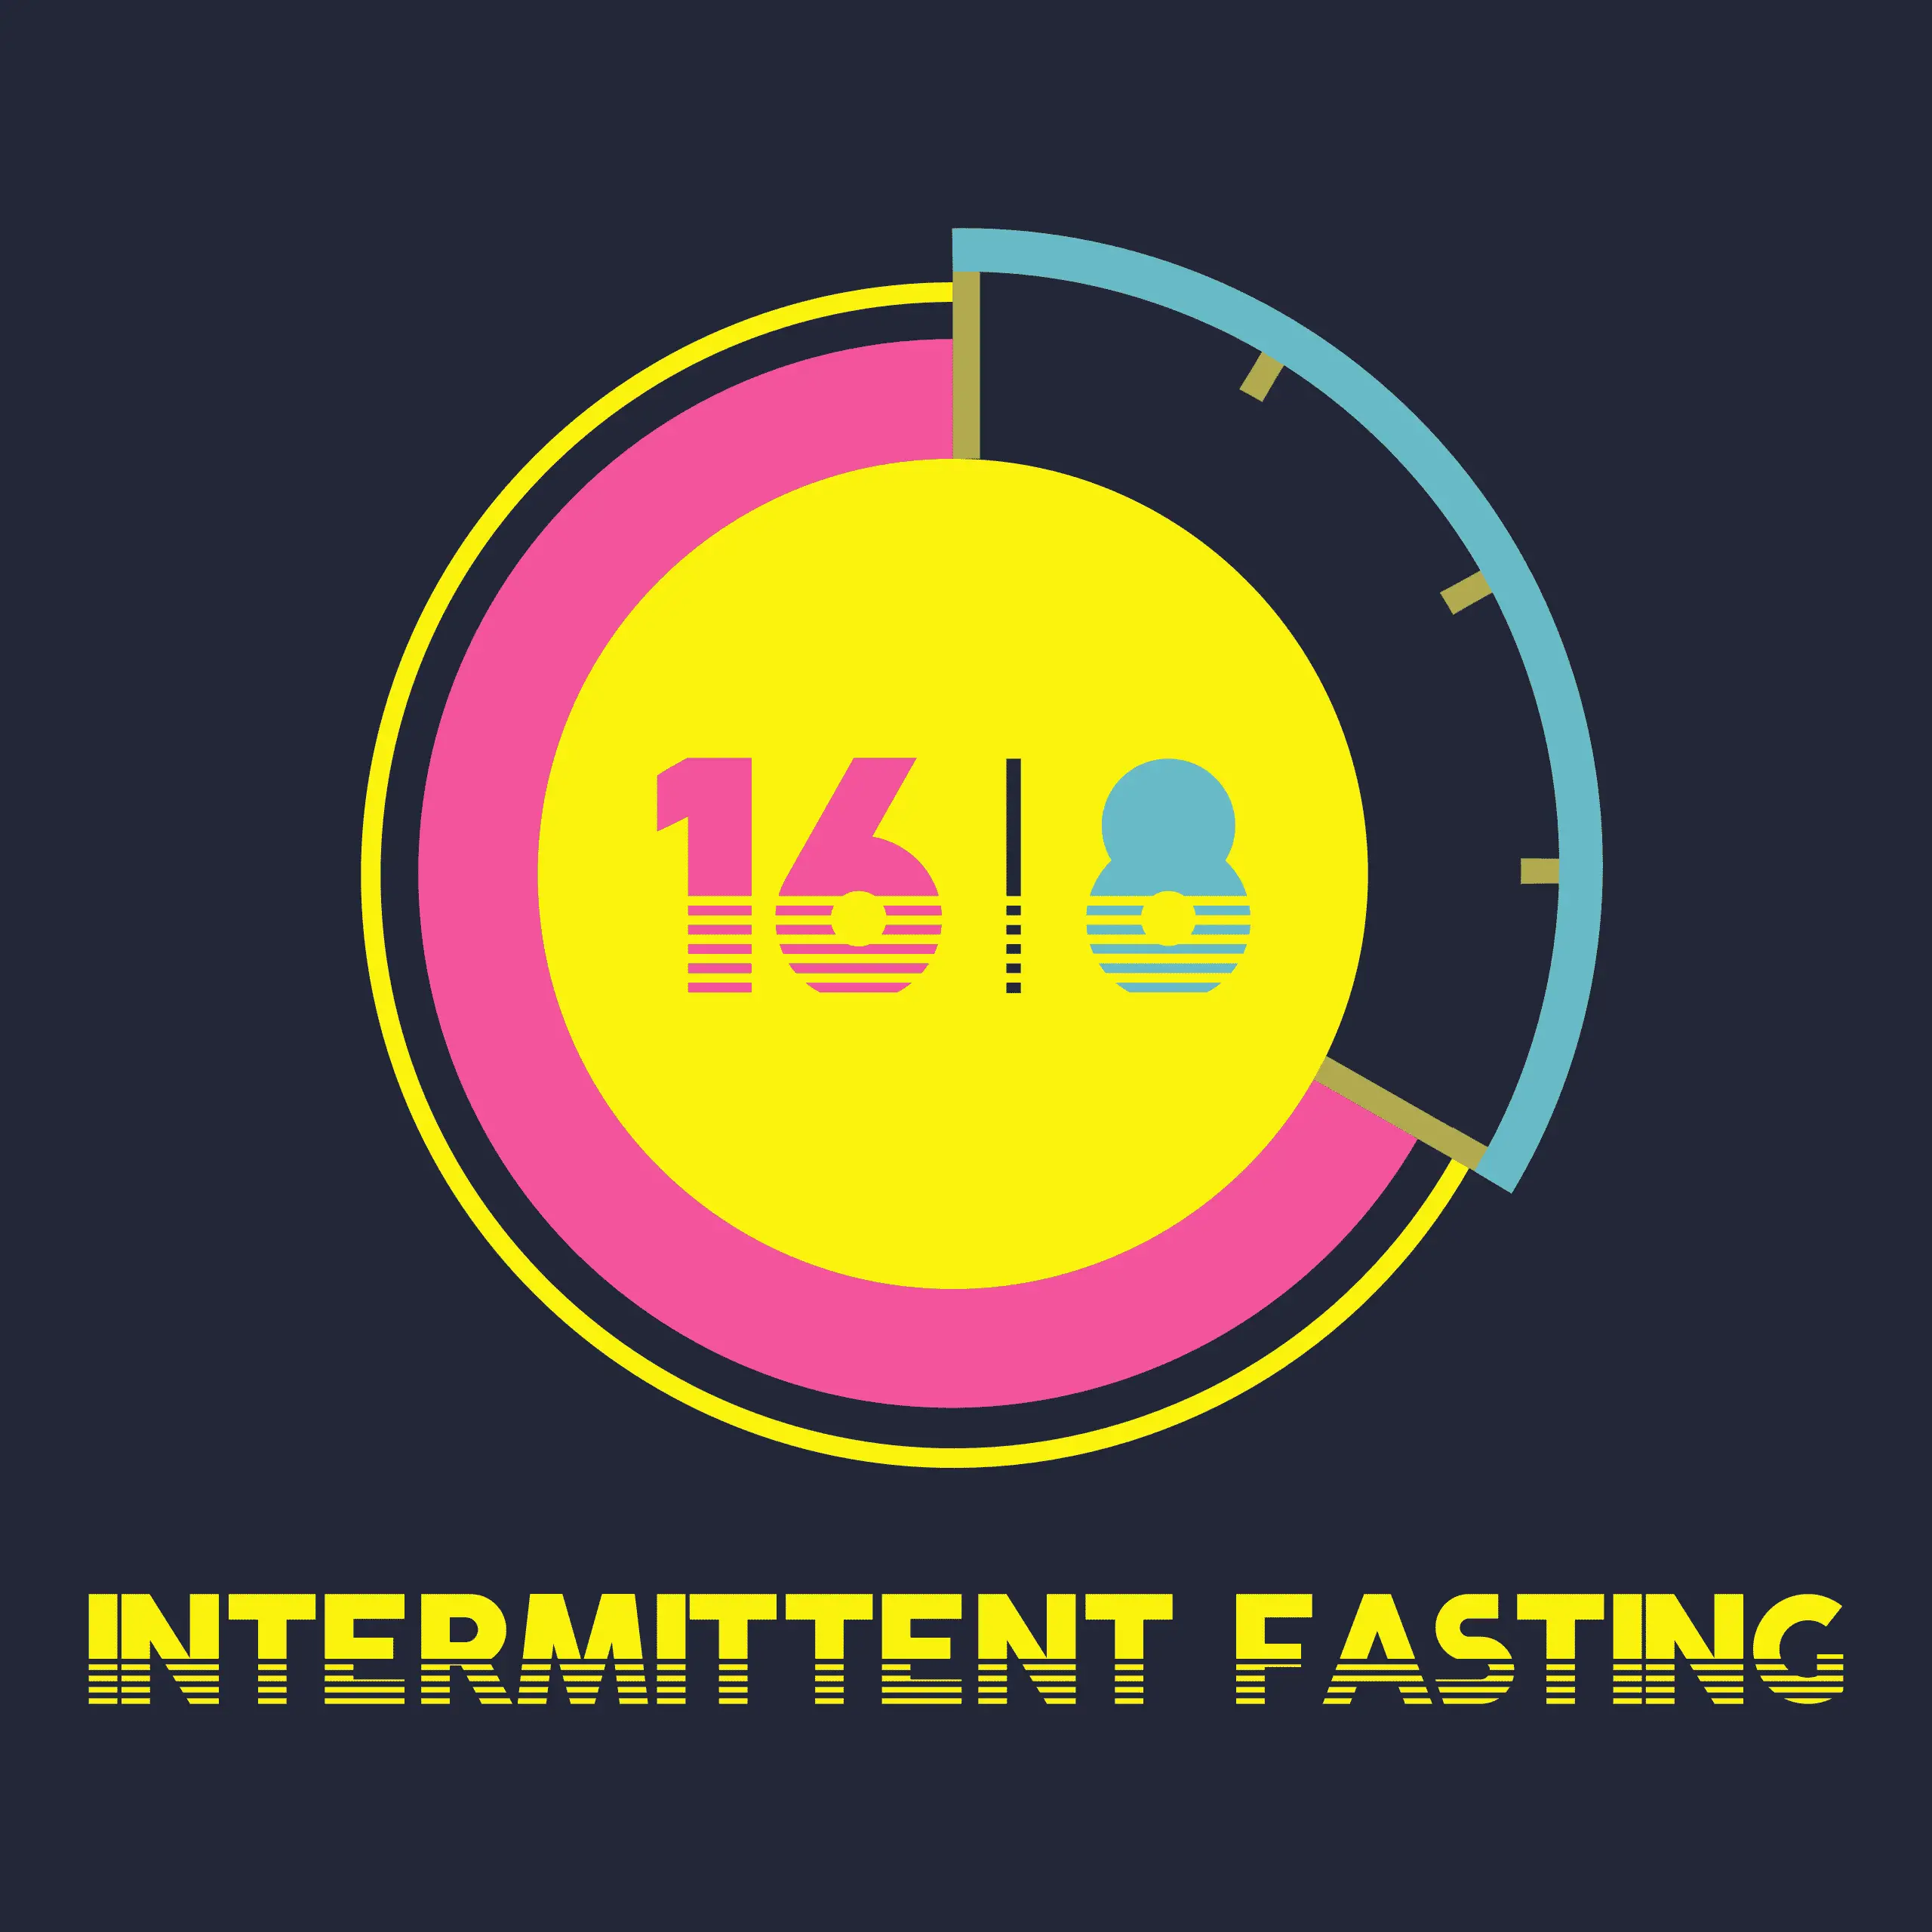 #how to do Intermittent fasting #how to start Intermittent fasting # ...